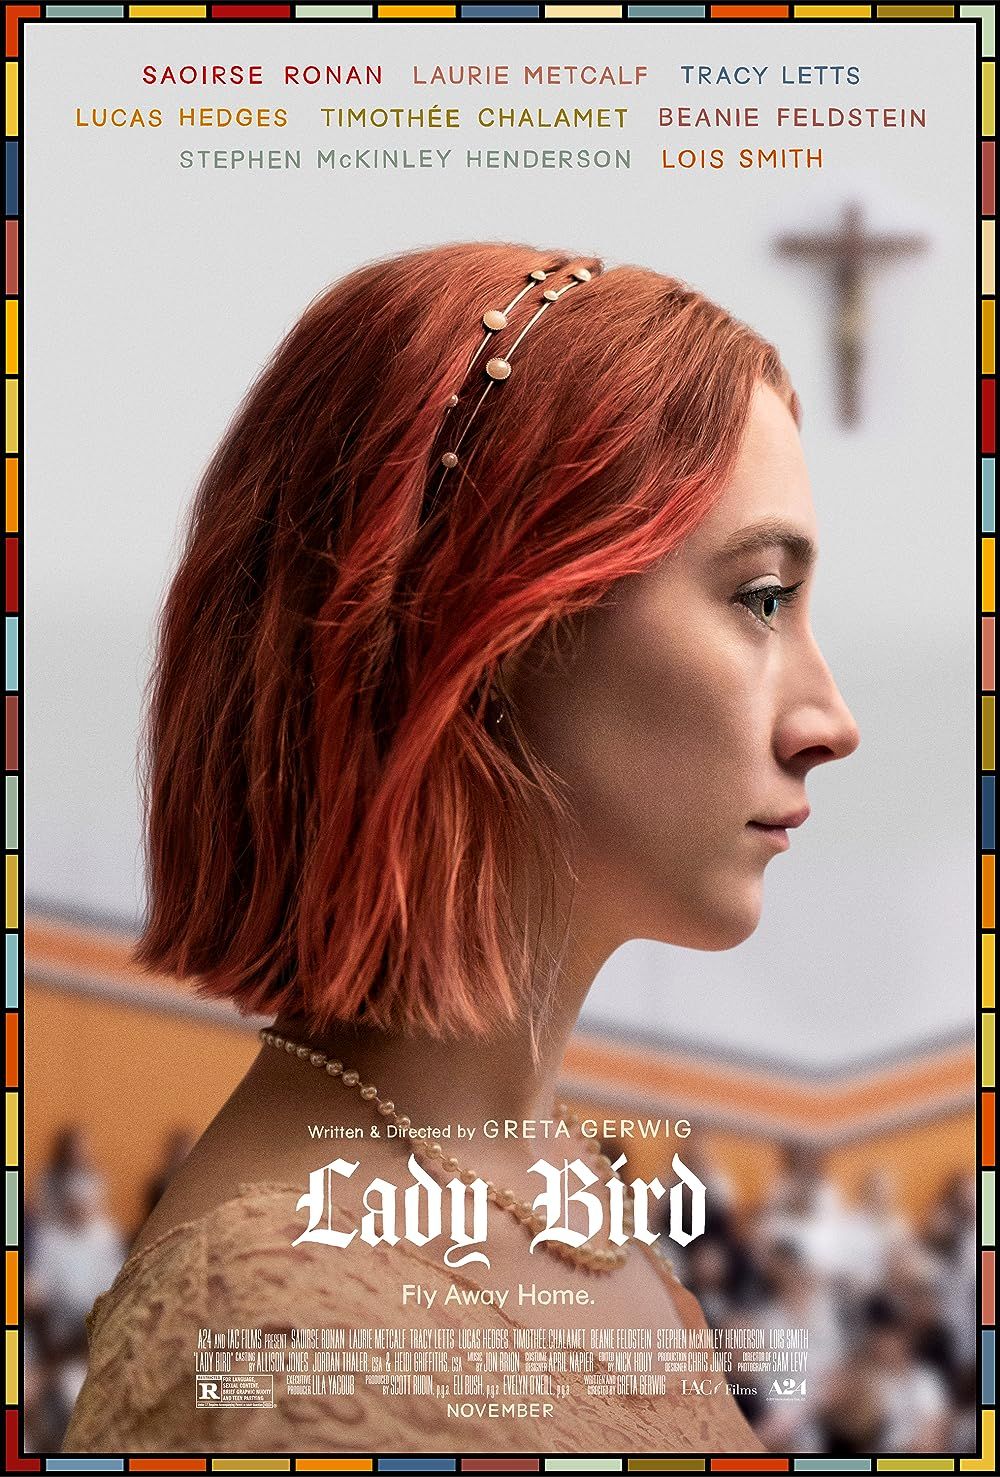 Poster for Lady Bird featuring Saoirse Ronan in profile